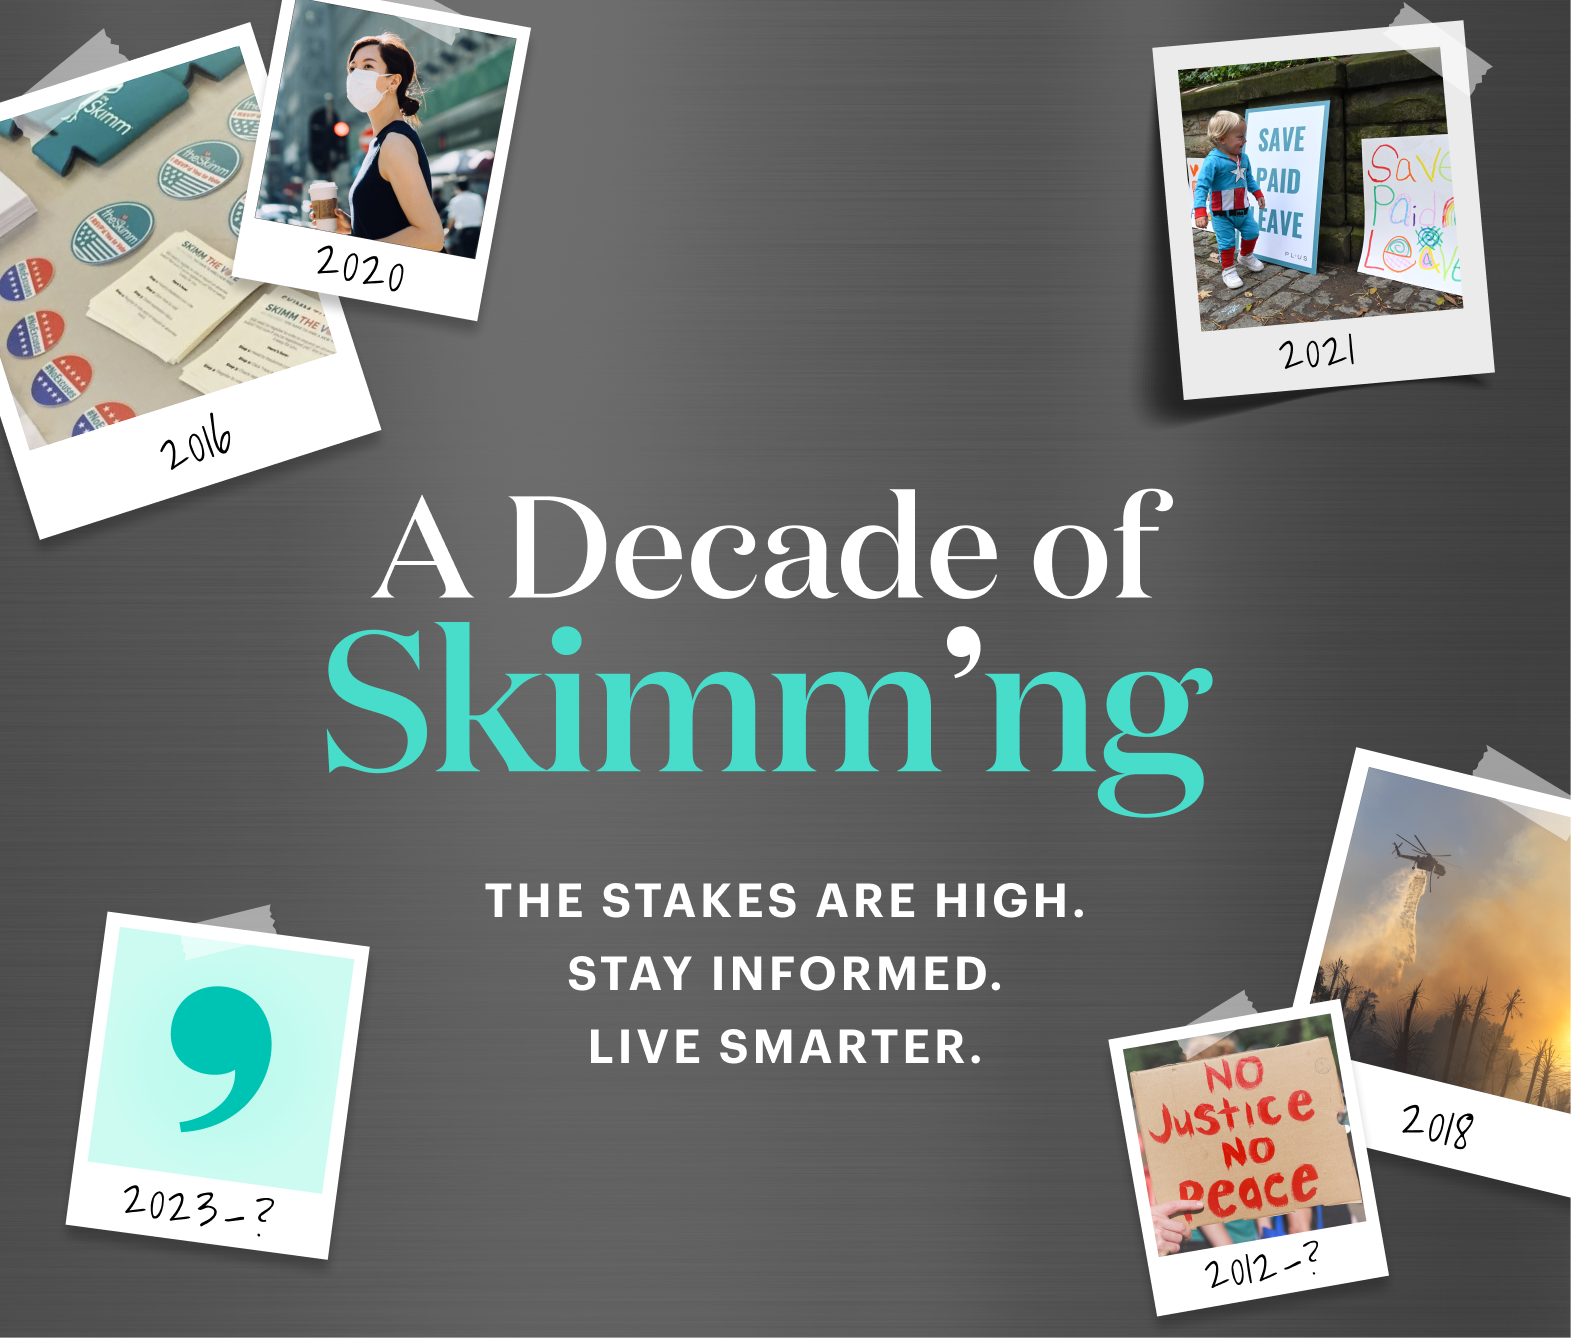 A Decade of Skimm'ng. The stakes are high. Stay informed. Live smarter.